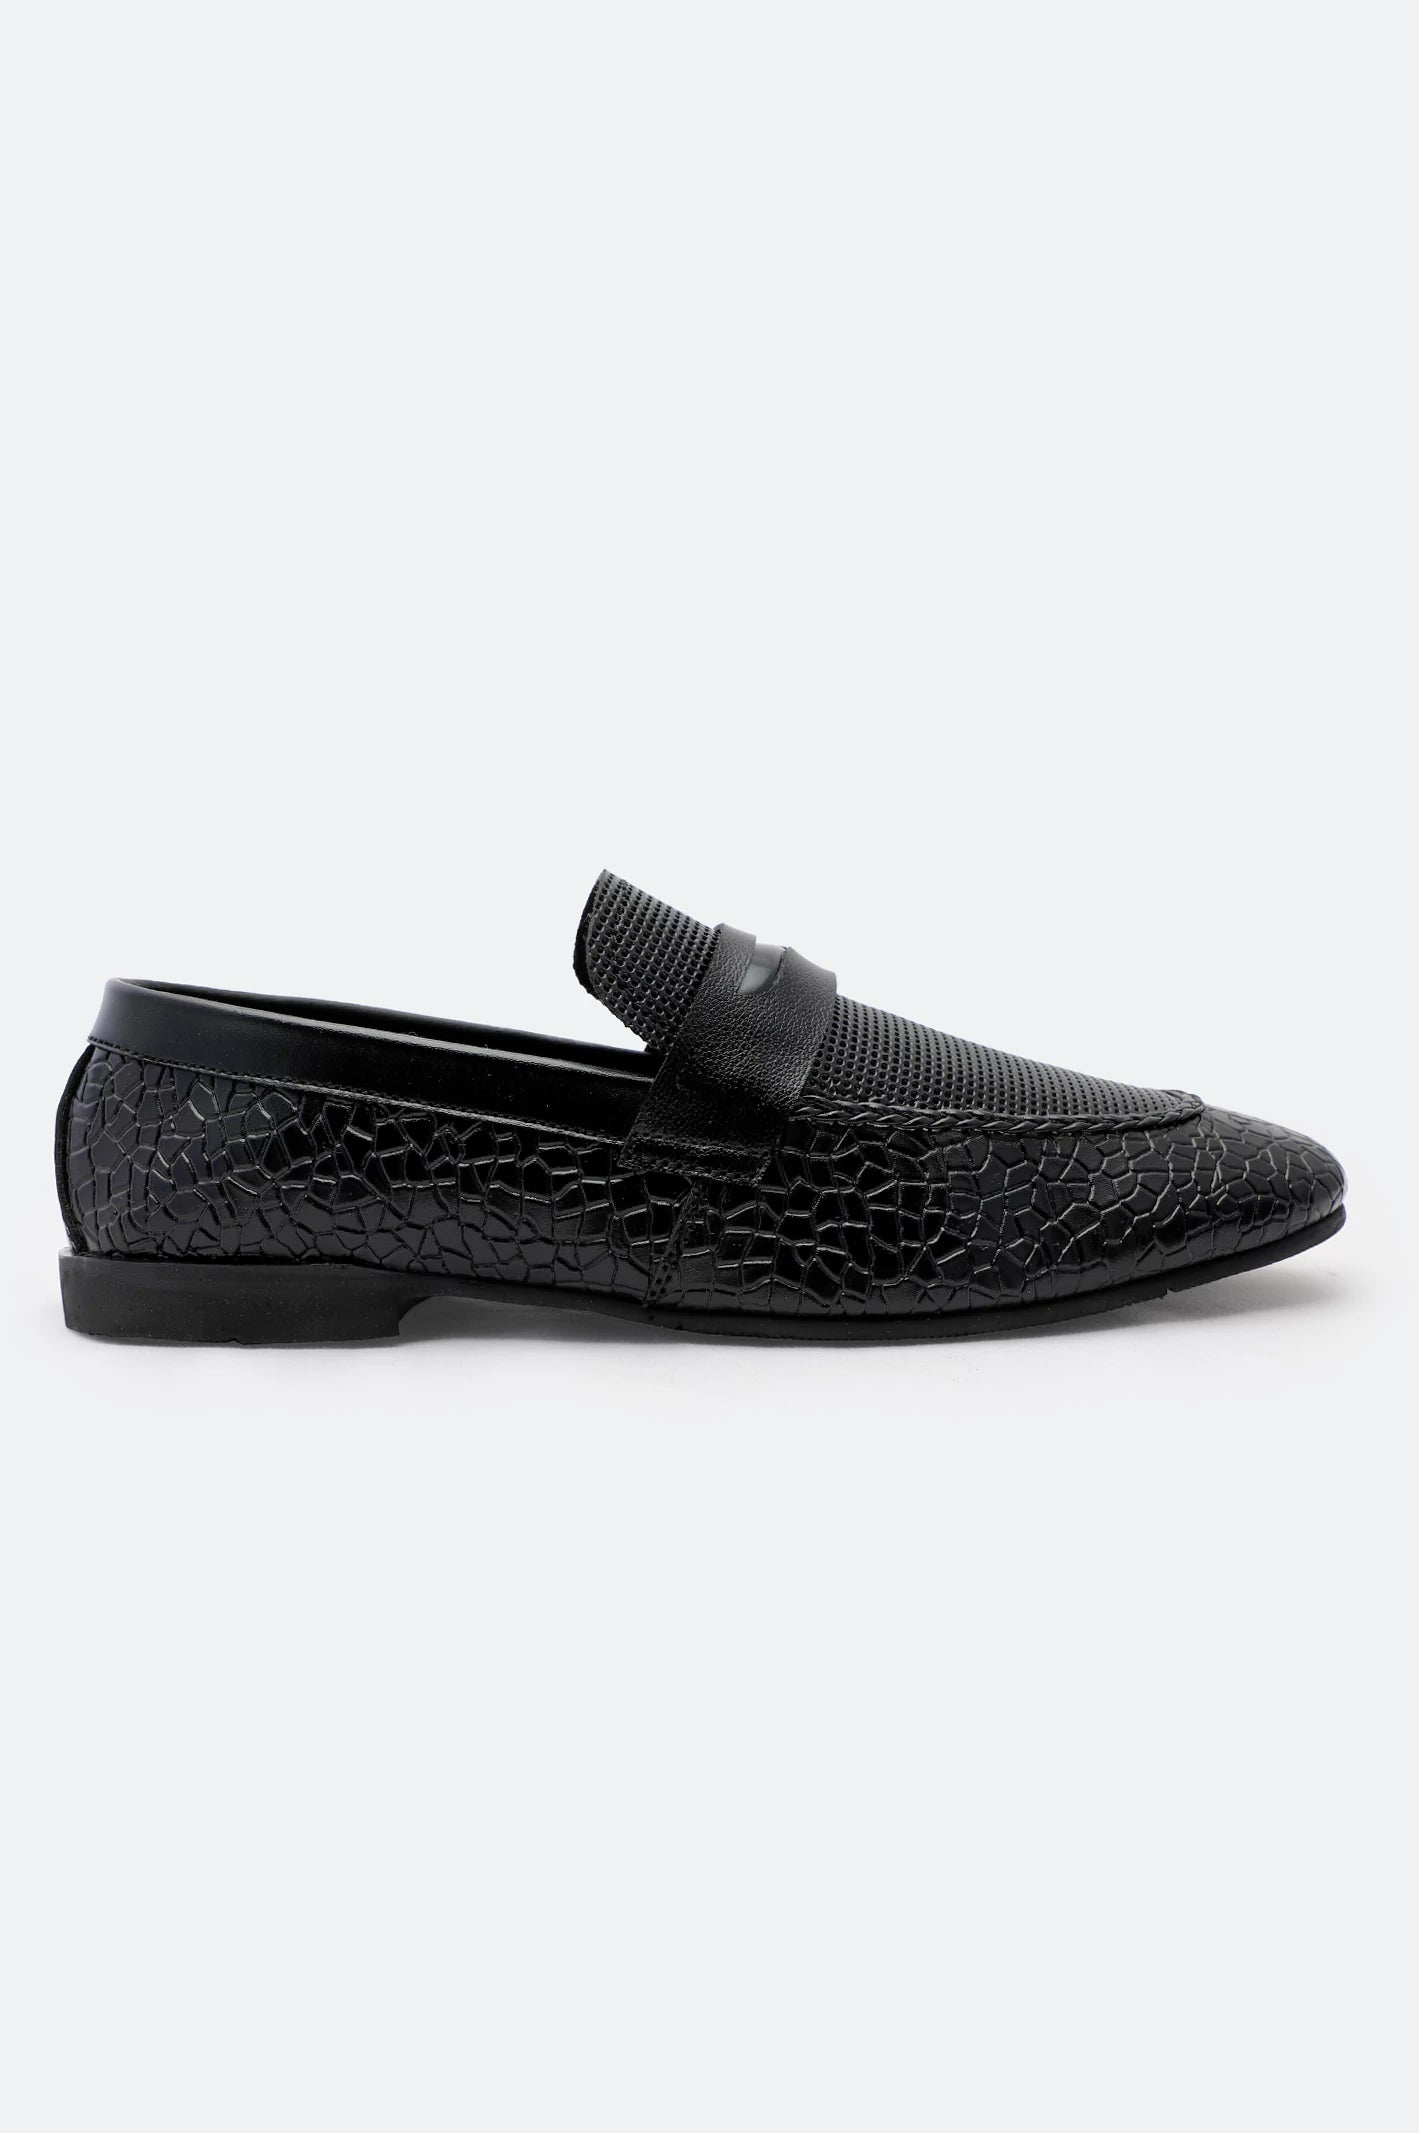 Black Formal Shoes For Men From Diners